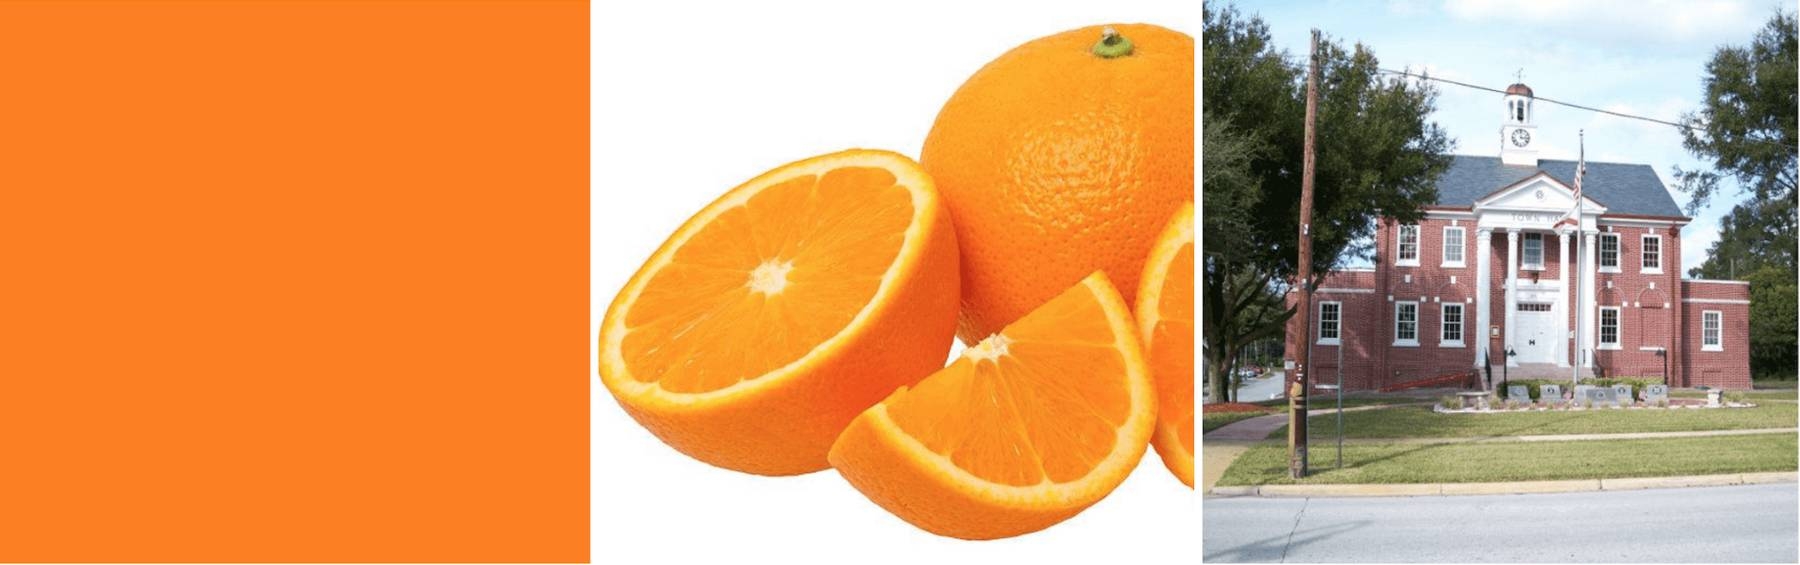 An image showing different meanings of the word 'orange'.